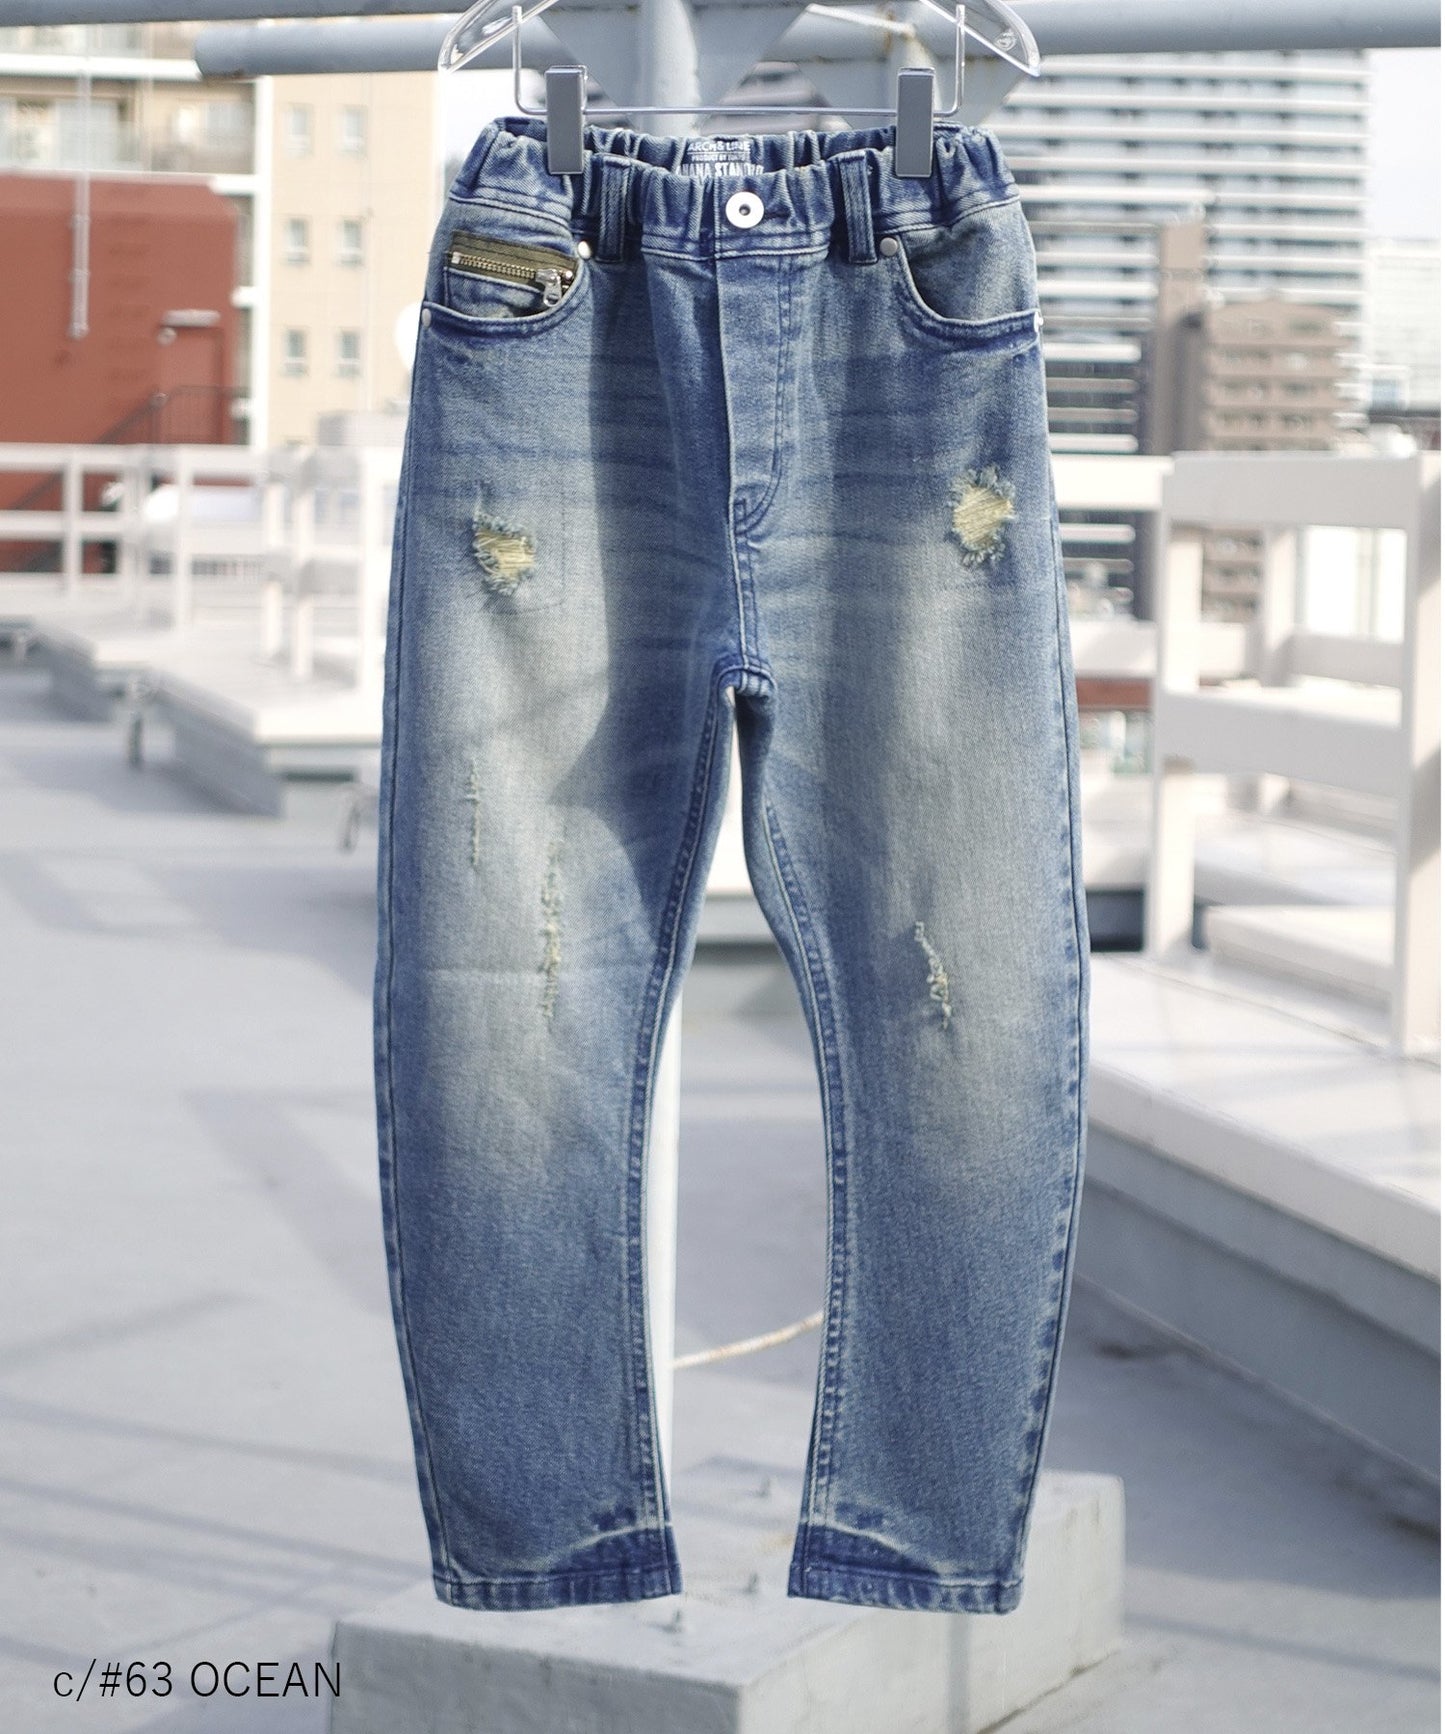 [Environmentally friendly material] RE DENIM BANANA PANTS Stretch denim Recycled cotton Year-round material [145-175cm]